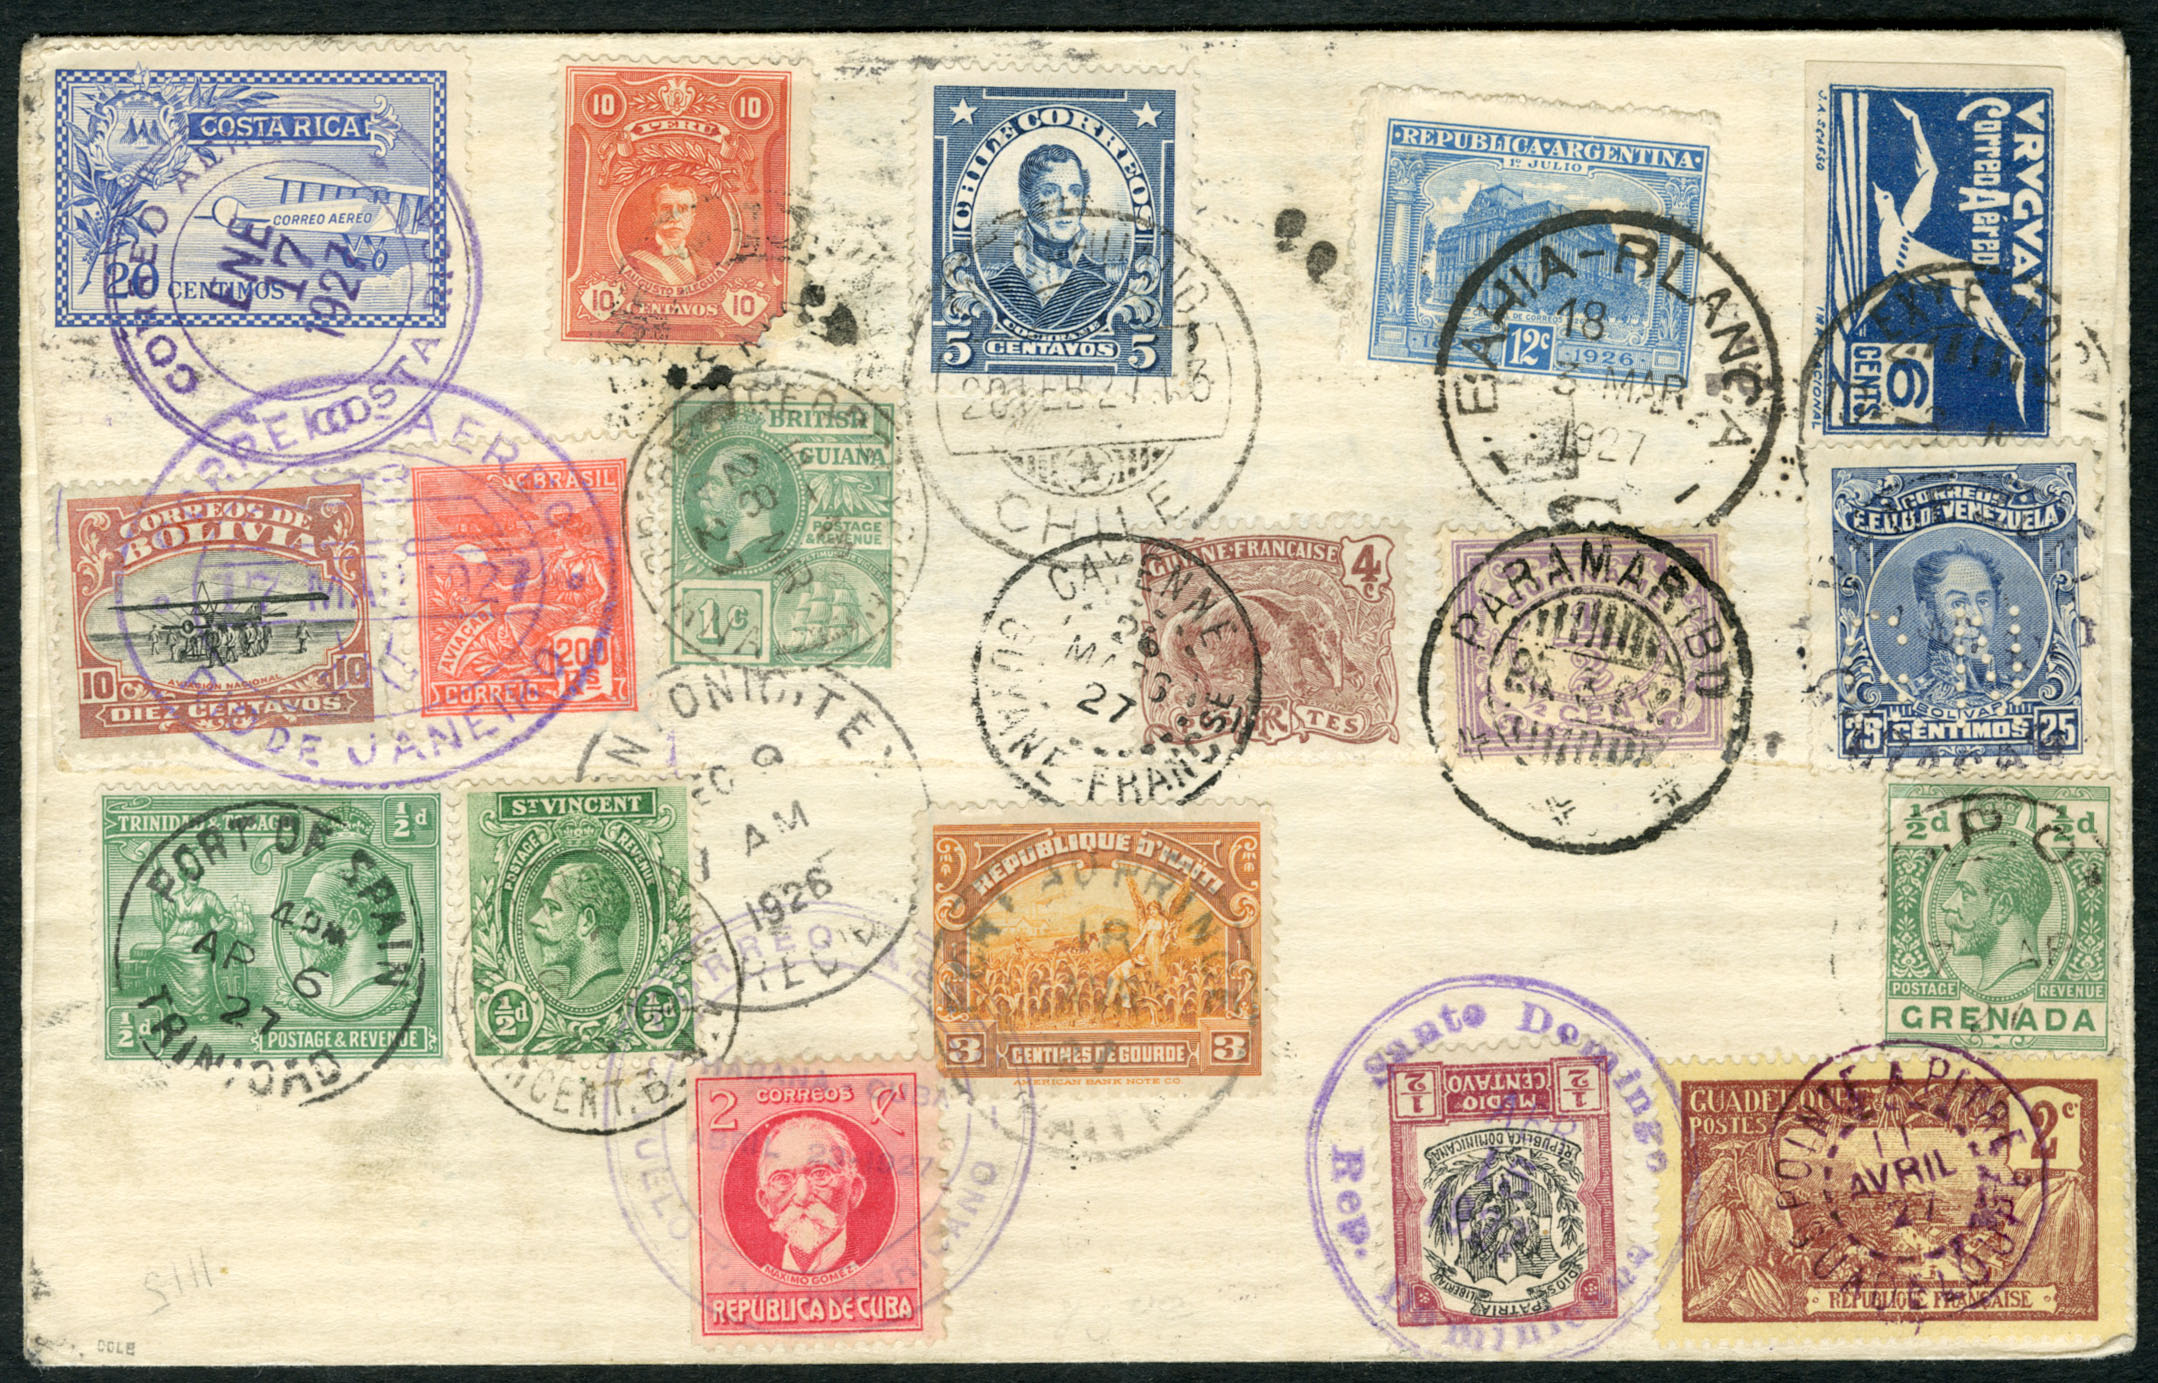 Lot 172 - United States - Air Post  Flight Covers  -  Cherrystone Auctions Rare Stamps & Postal History of the World